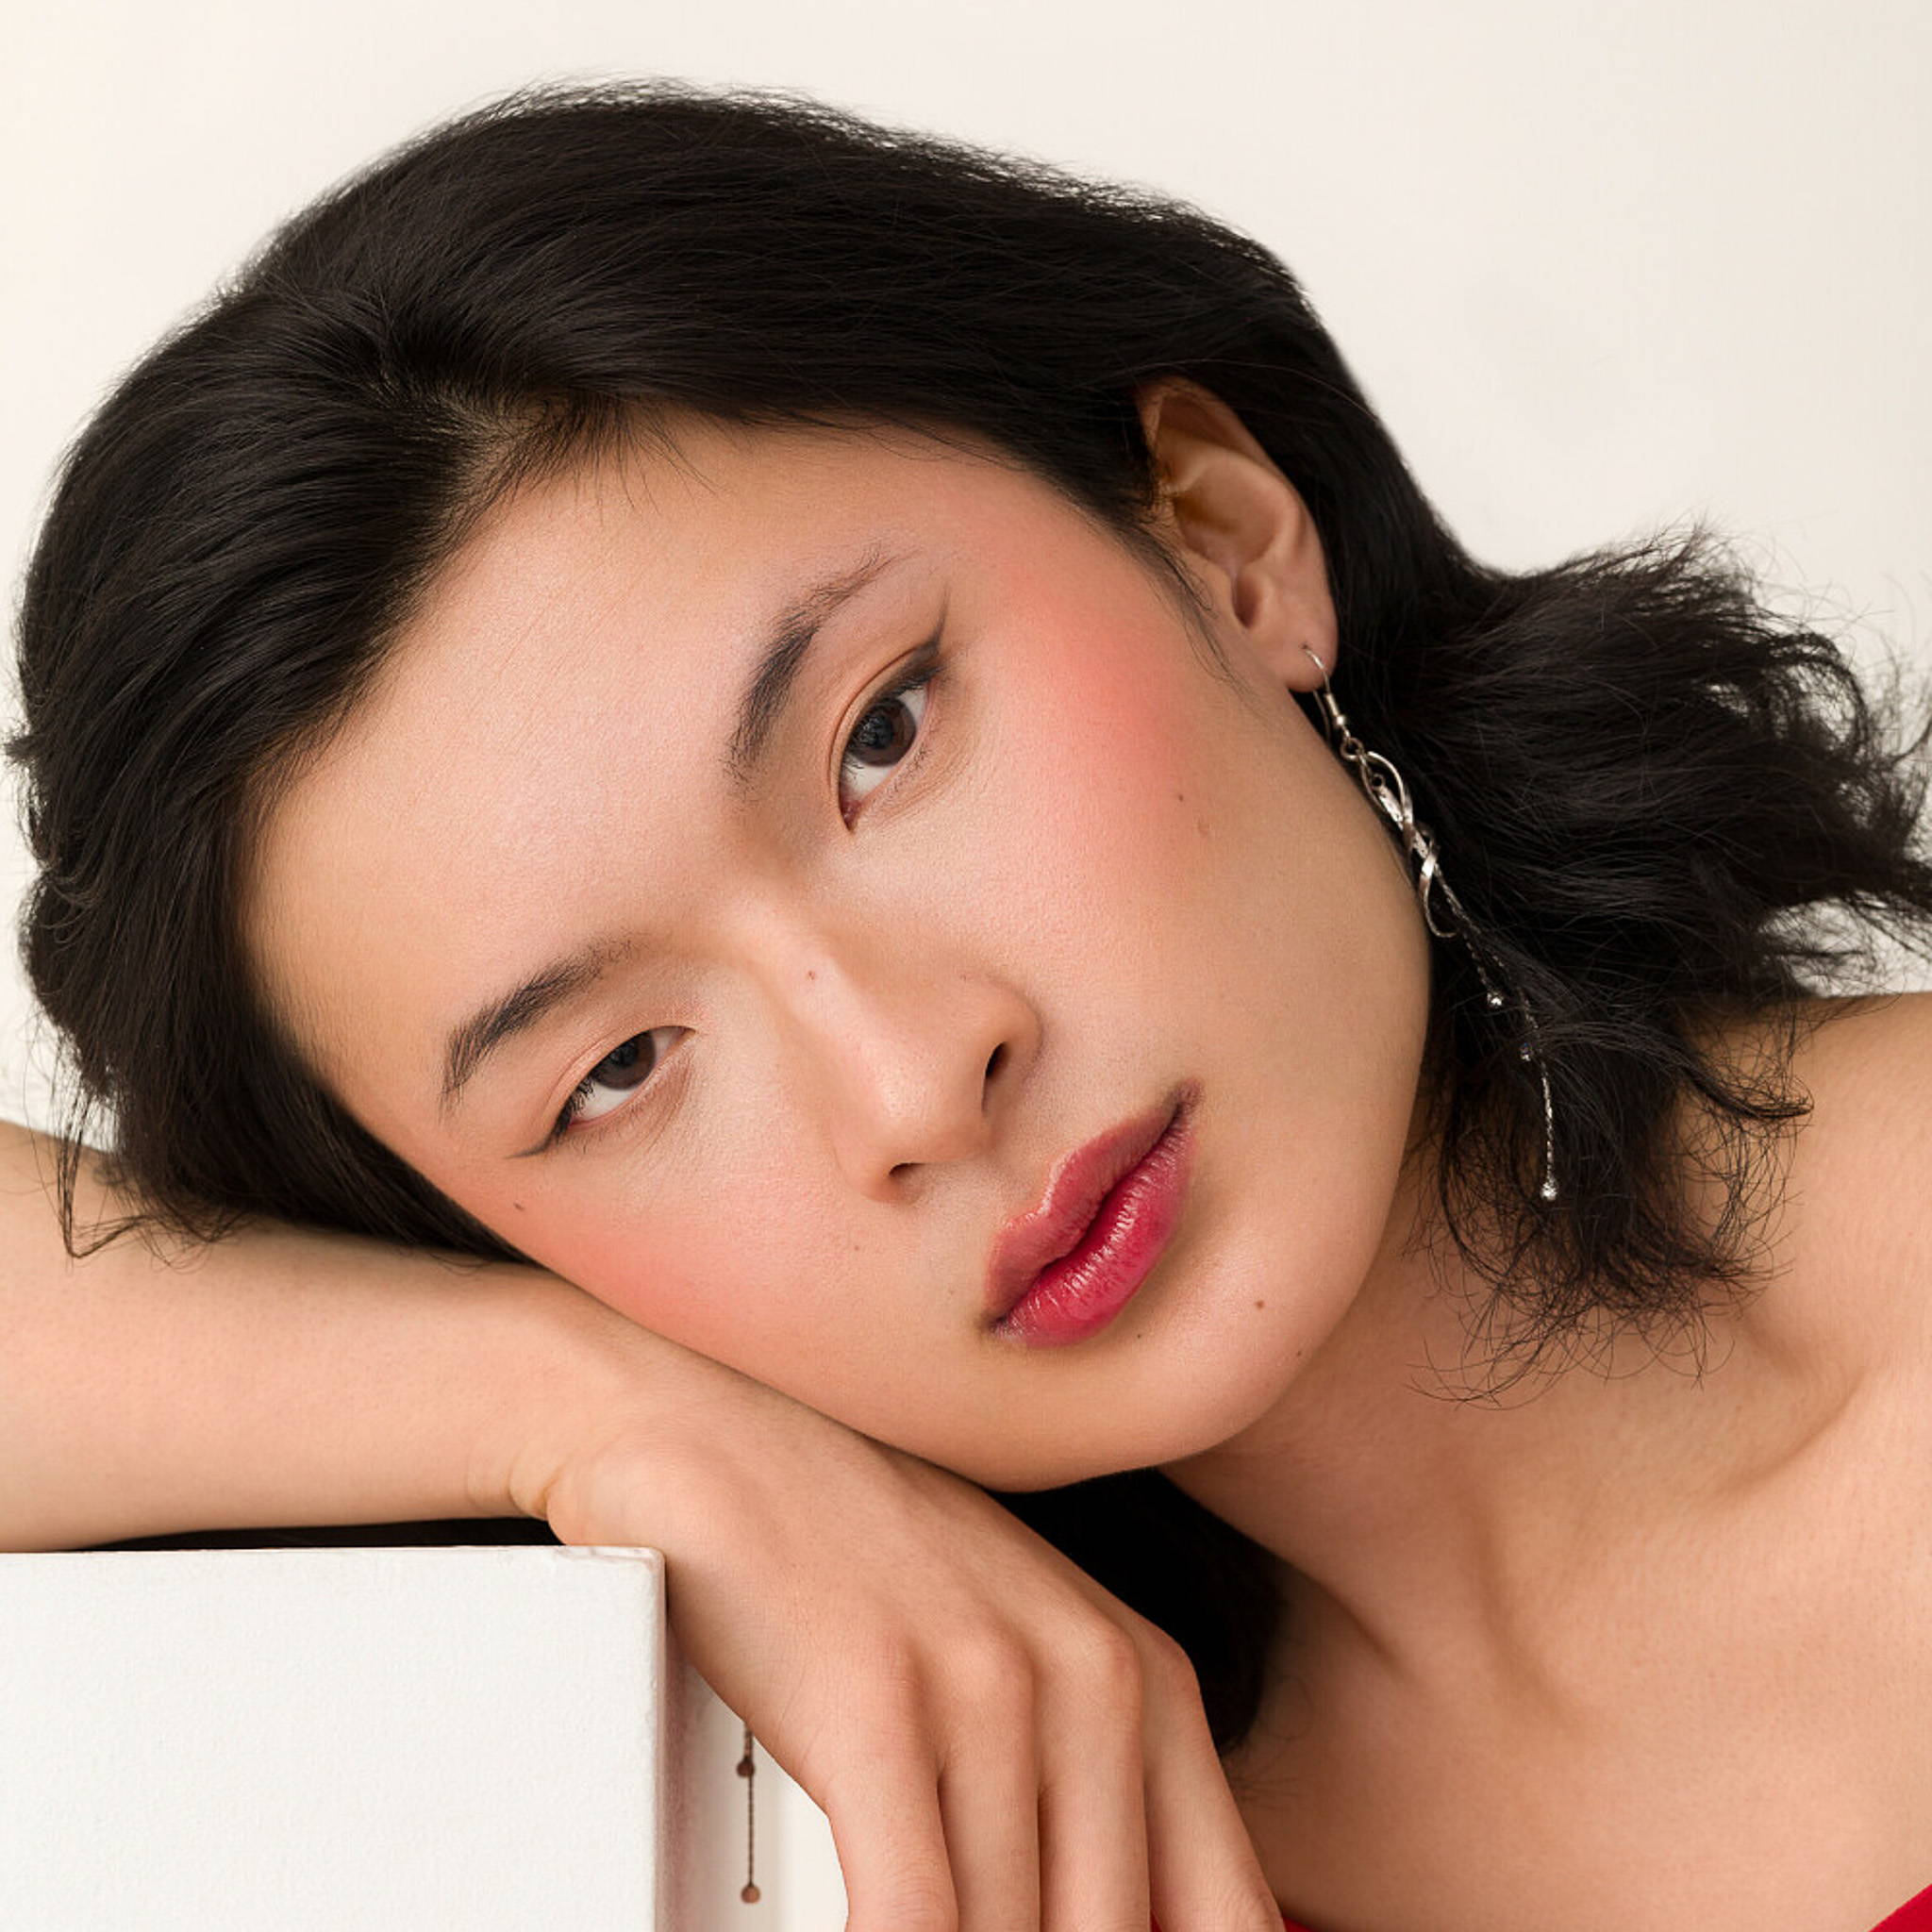 Model Jaden is facing the camera against a white background. Their head is propped up on the back of their right hand which is resting on a white box. They are wearing red lipstick and a long, delicate metal earring.